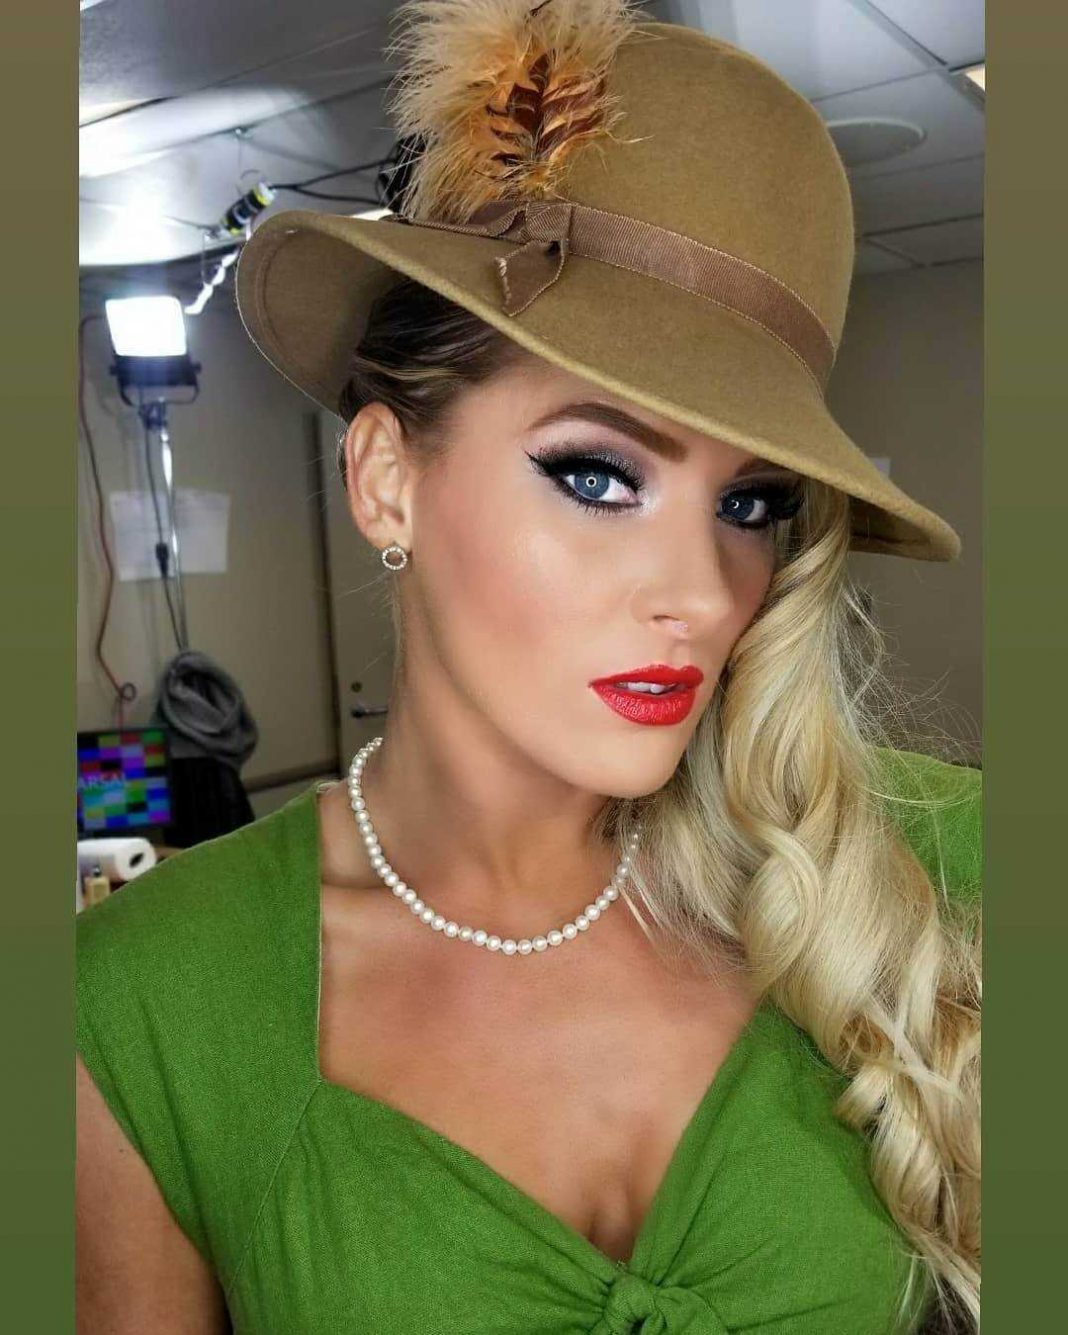 42 Lacey Evans Nude Pictures Present Her Polarizing Appeal 337